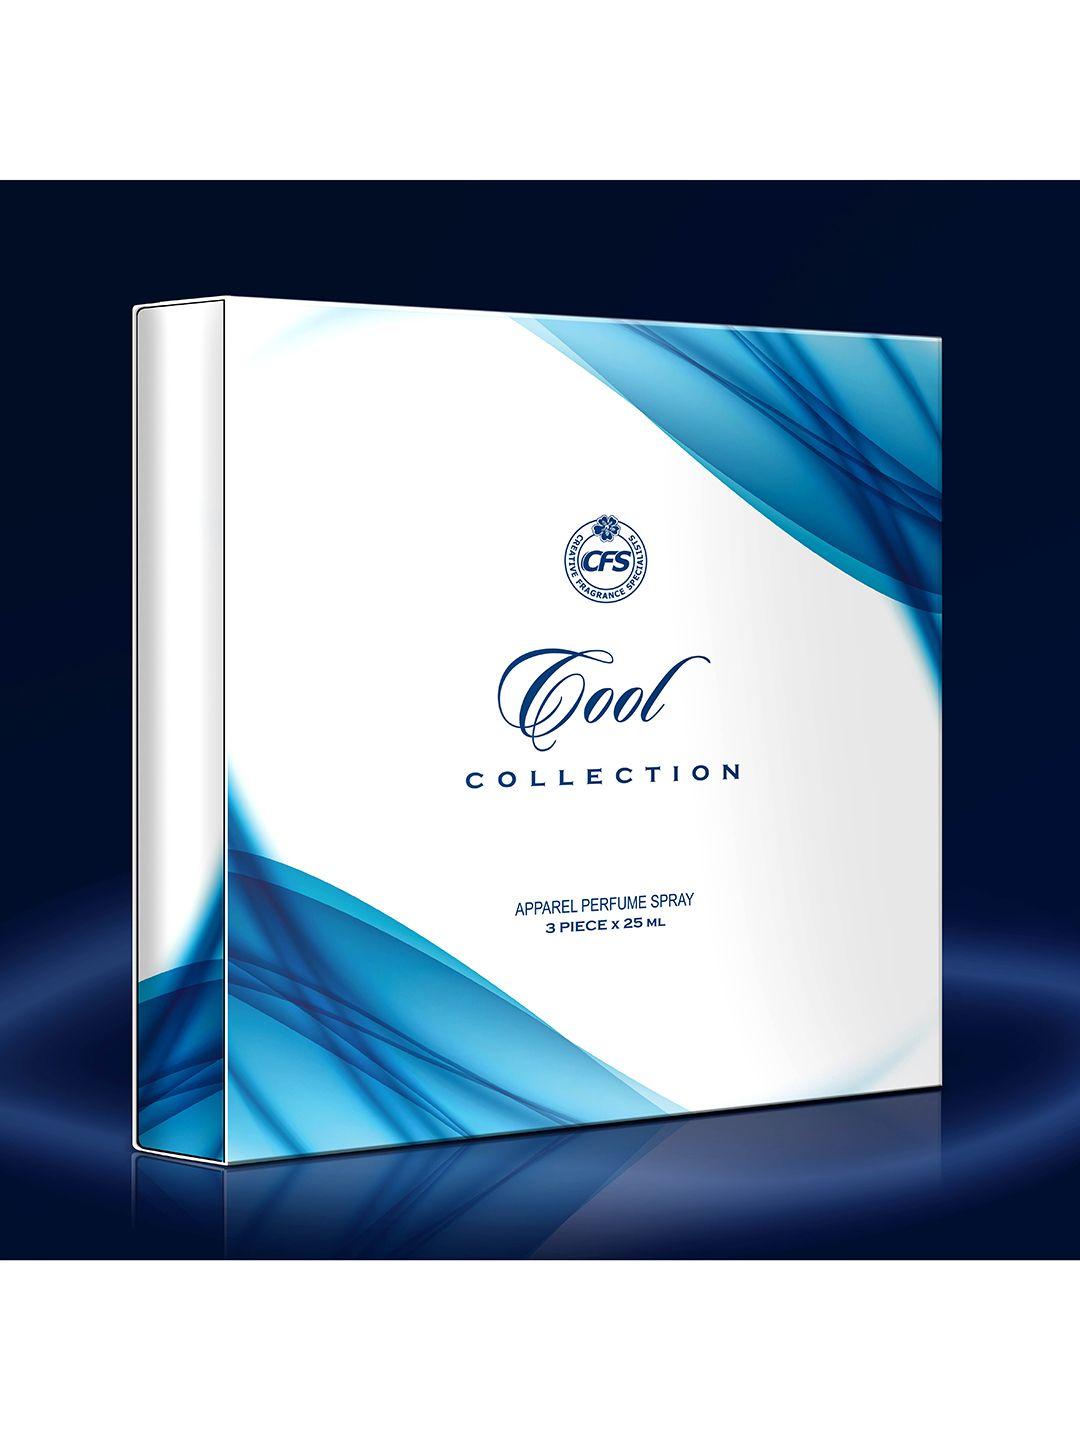 cfs-cool-collection-perfume-set---begin-blue-+-cargo-white-+-21-club-ice-water---25ml-each